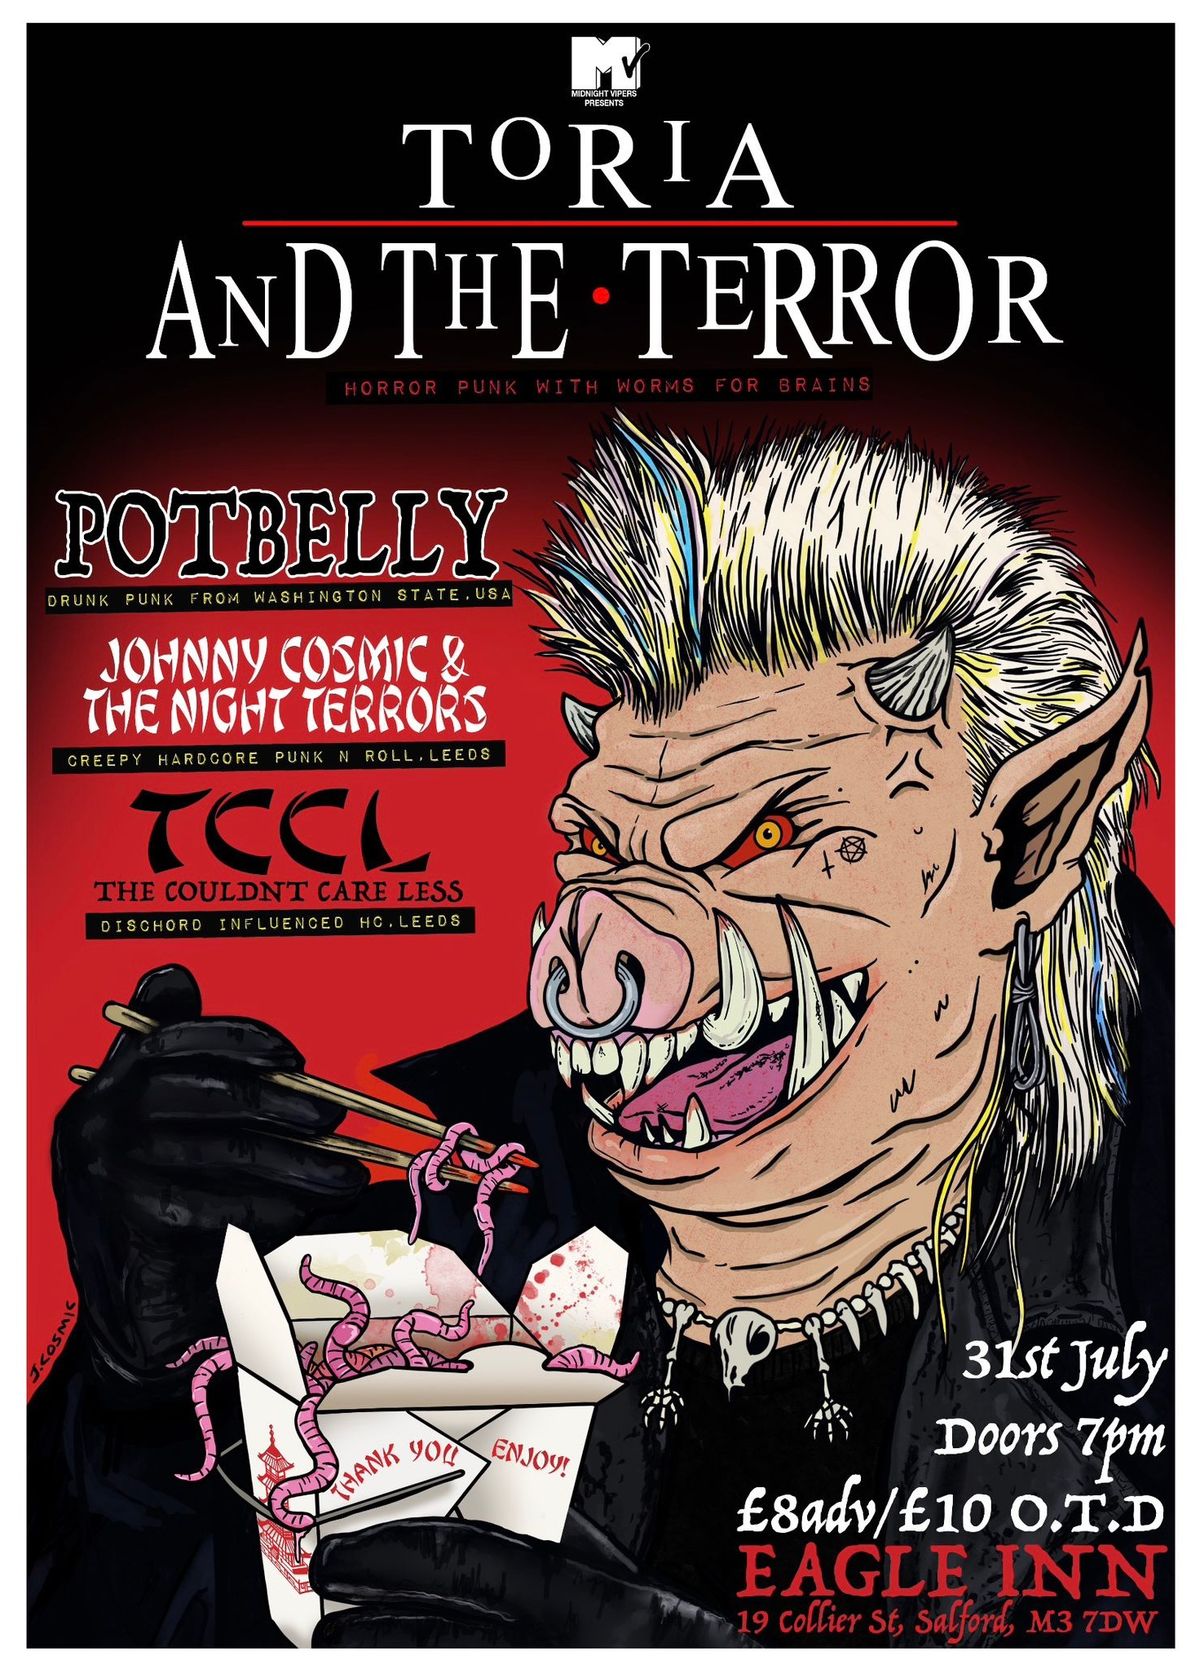 TORIA AND THE TERROR \/\/ JOHNNY COSMIC AND THE NIGHT TERRORS \/\/ TCCL \/\/ POTBELLY (US)